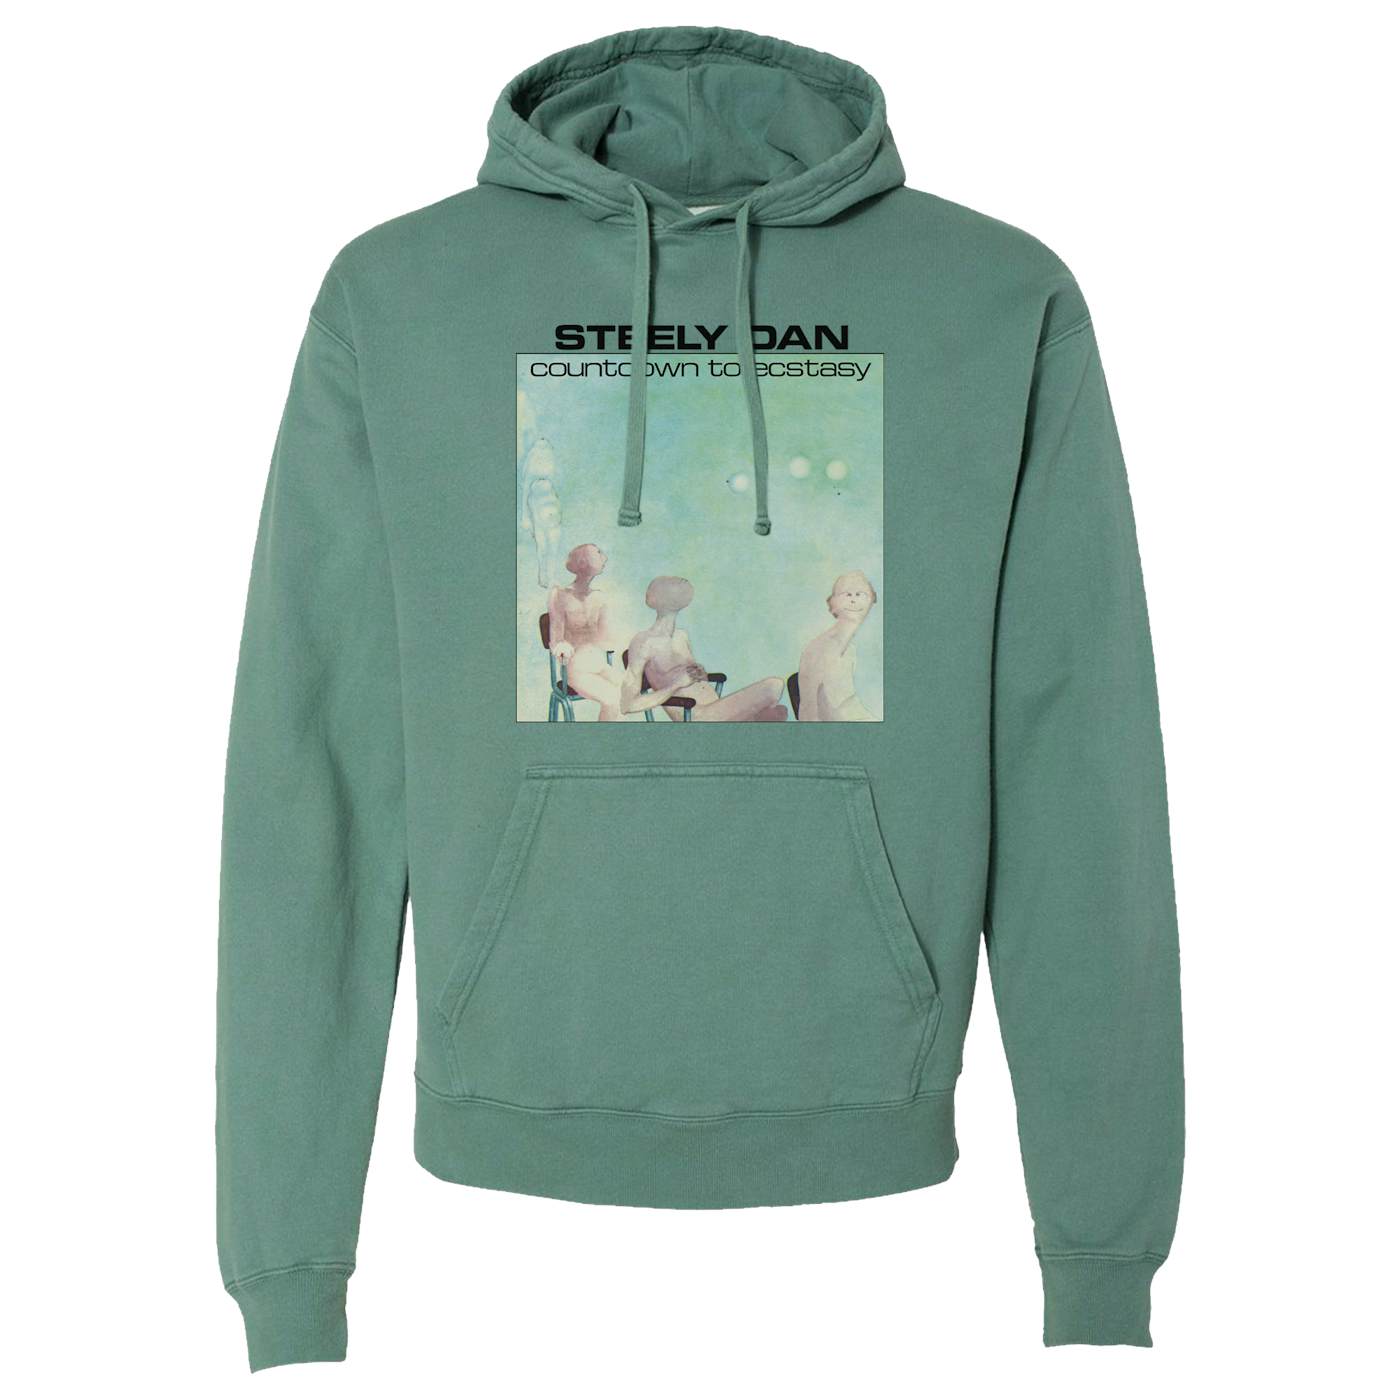 Steely Dan Countdown to Ecstasy Pullover Hoodie